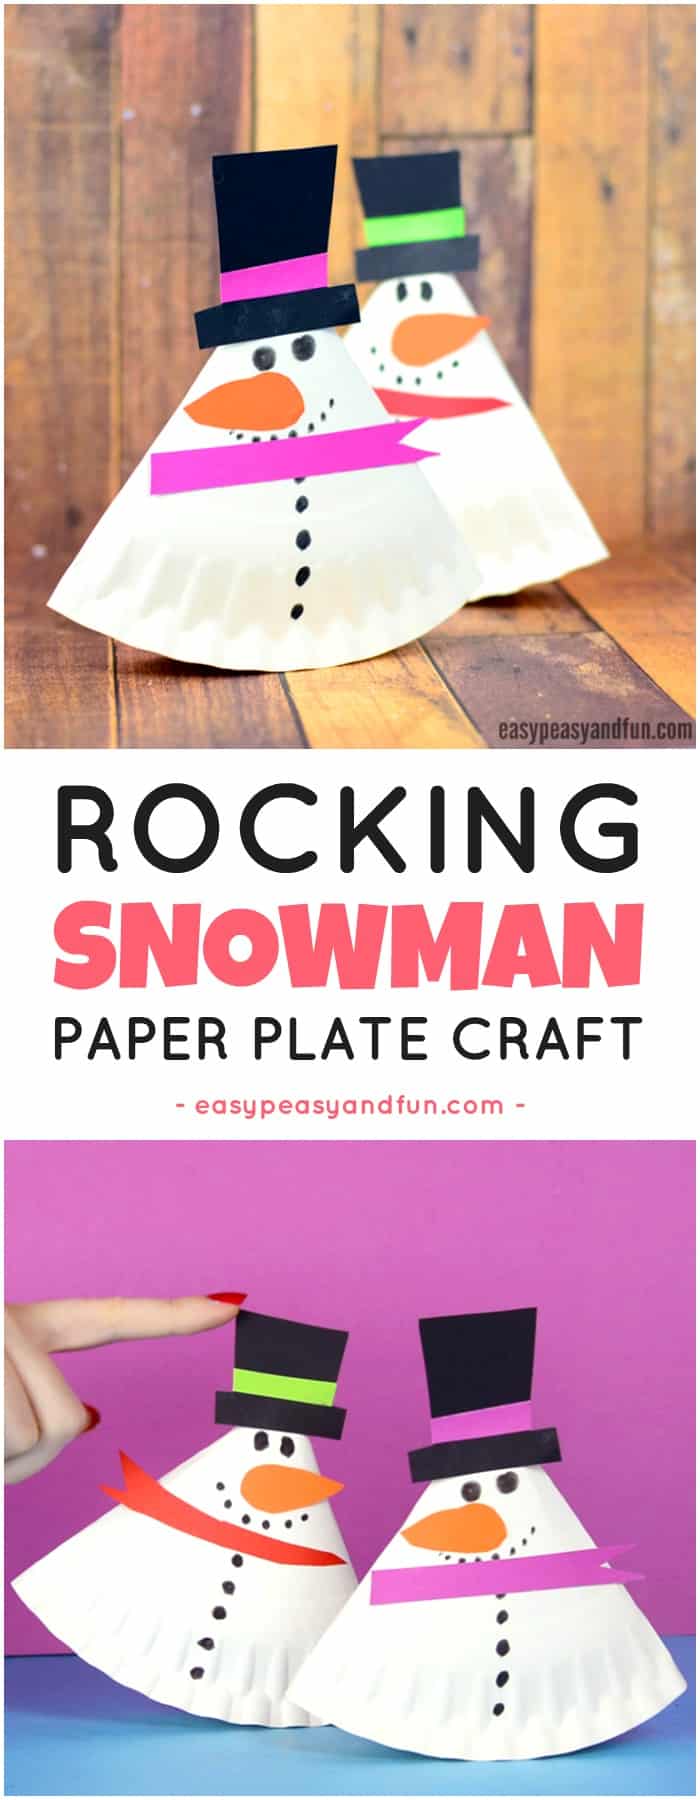 rocking paper plate snowman craft for kids